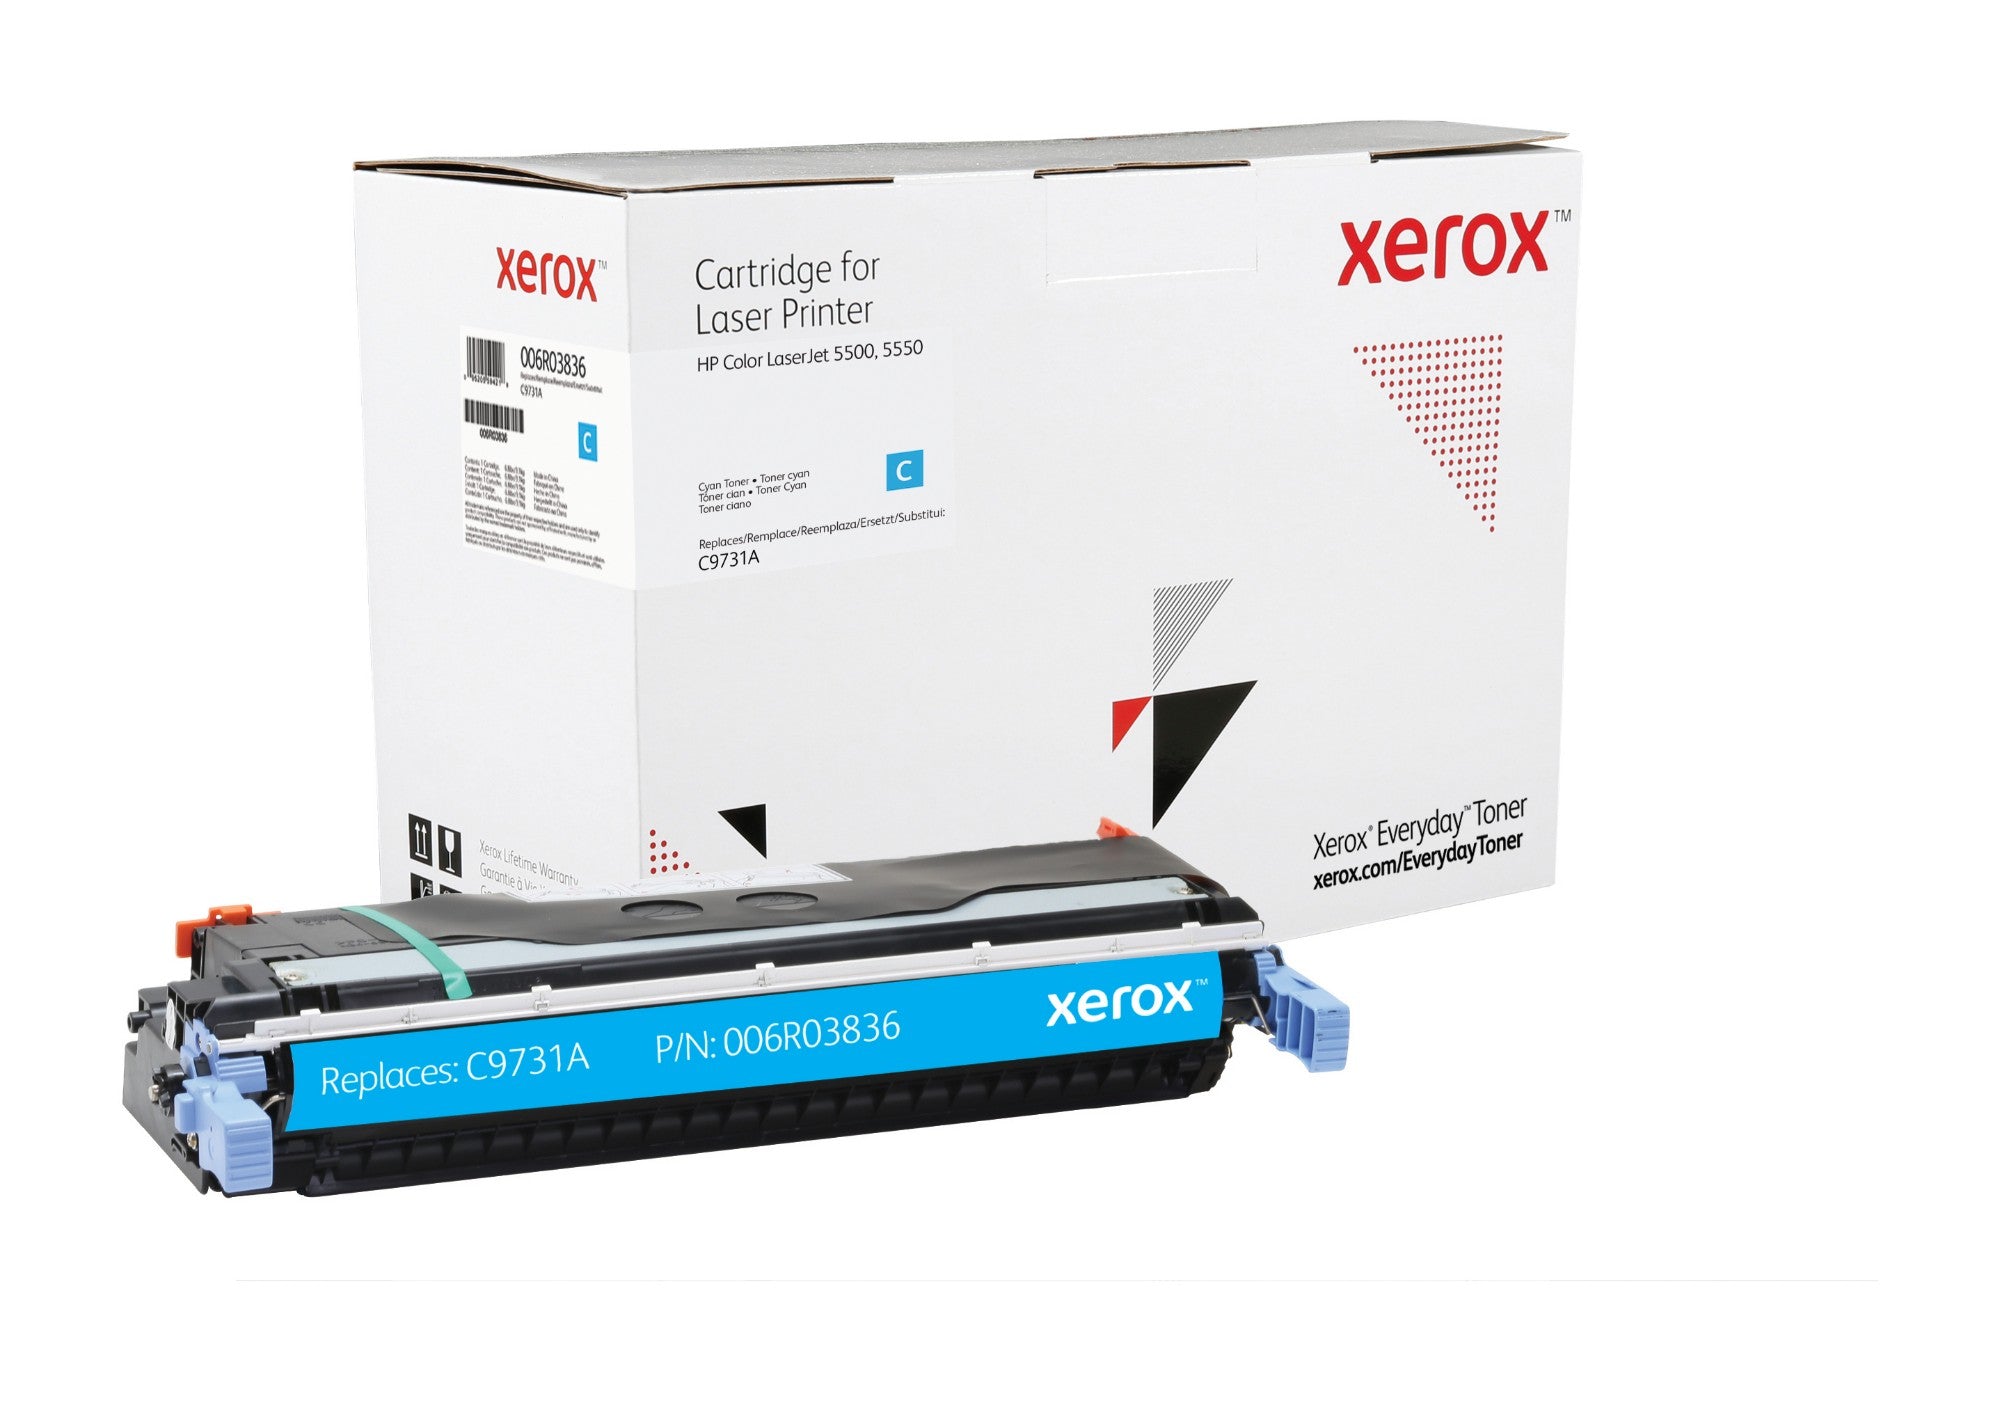 Xerox 006R03836 Toner cartridge cyan, 12K pages/5% (replaces HP 645A/C9731A) for Canon LBP-86